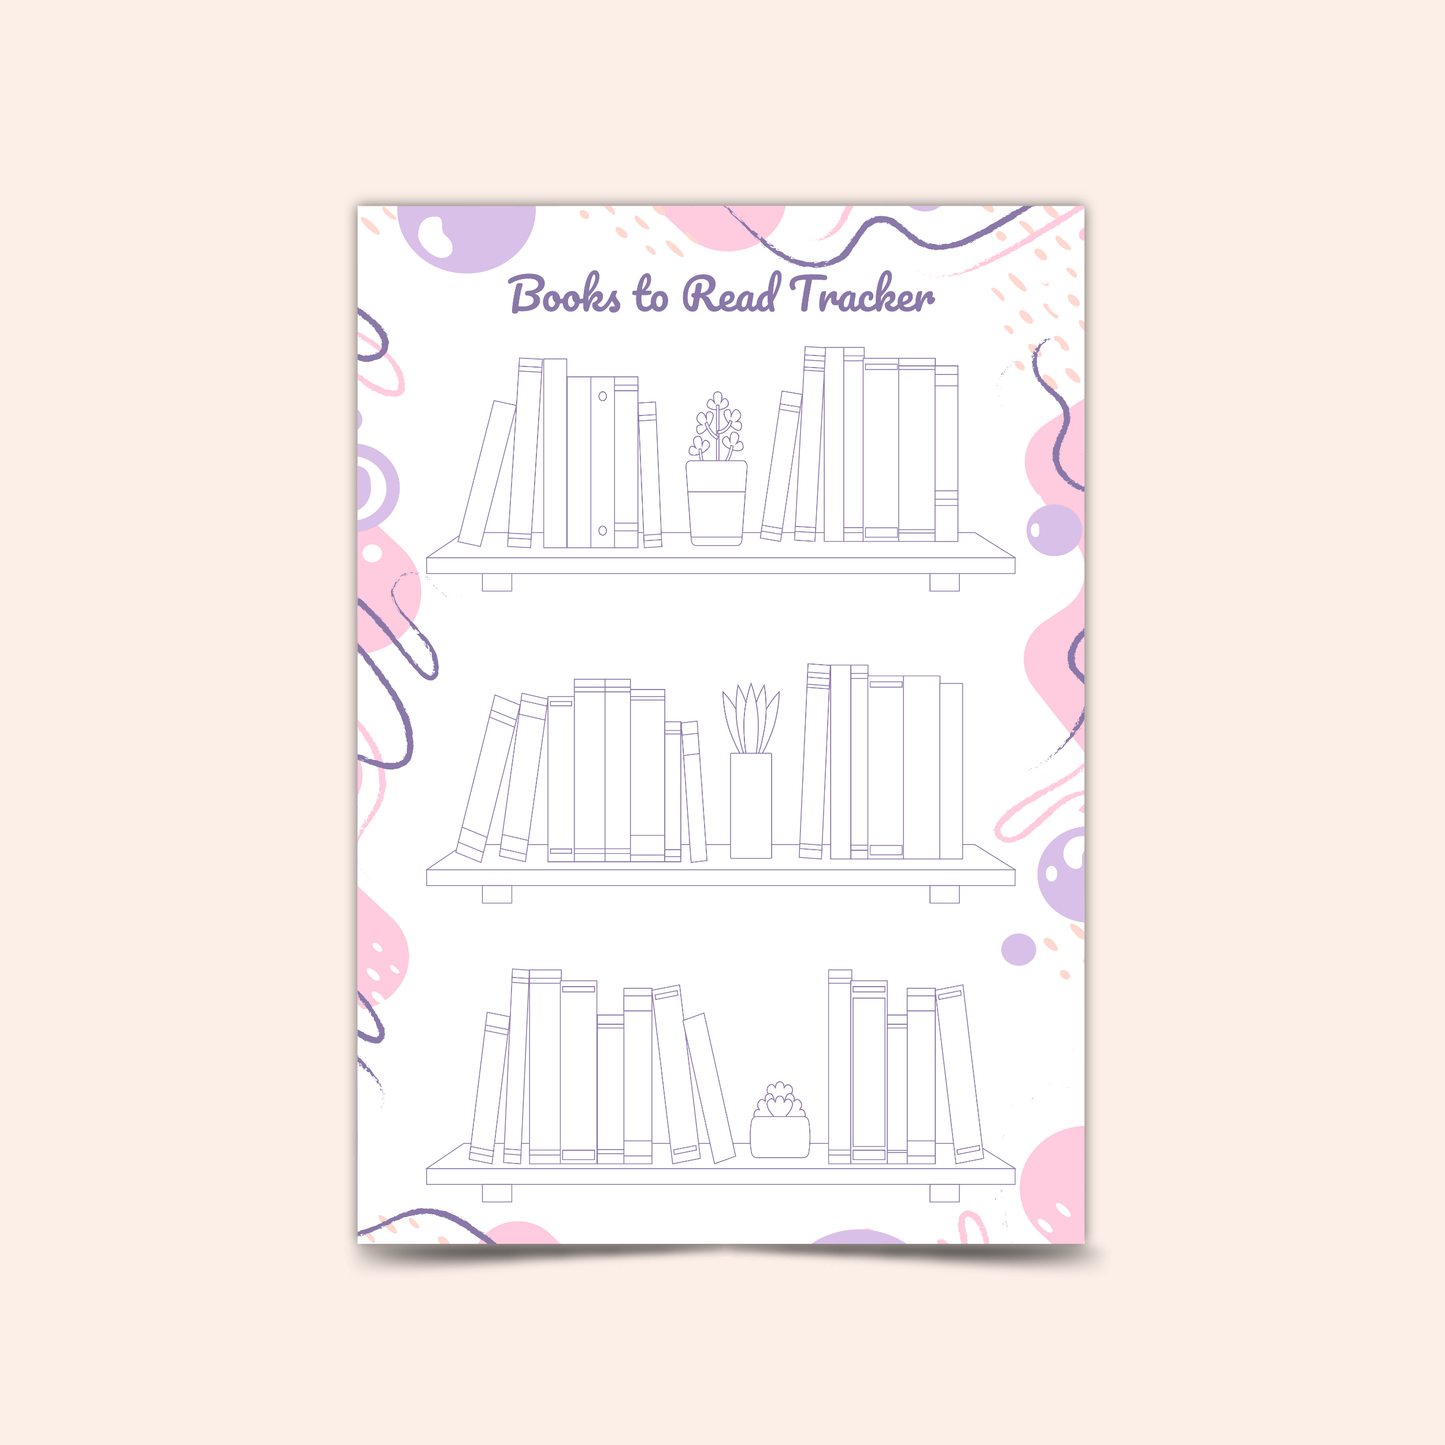 Books to Read Tracker